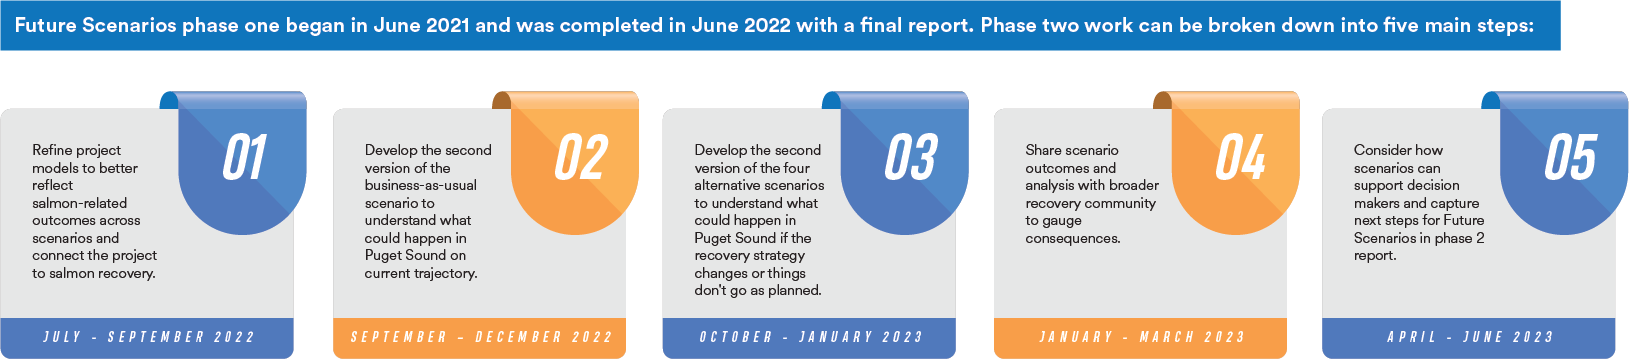 Graphic that shows the timeline for phase two of the Future Scenarios project. The text in the timeline says the following: Future Scenarios phase one began in June 2021 and was completed in June 2022 with a final report. Phase two work can be broken down into five main steps: Refine project models to better reflect salmon-related outcomes across scenarios and connect the project to salmon recovery, July – September 2022. Develop the second version of the business-as-usual scenario to understand what could happen in Puget Sound on current trajectory, Sept. – Dec. 2022. Develop the second version of the four alternative scenarios to understand what could happen in Puget Sound if the recovery strategy changes or things don't go as planned, Oct. 2022 – Jan. 2023. Share scenario outcomes and analysis with broader recovery community to gauge consequences, Jan. – March 2023. Consider how scenarios can support decision makers and capture next steps for Future Scenarios in phase two report, April – June 2023